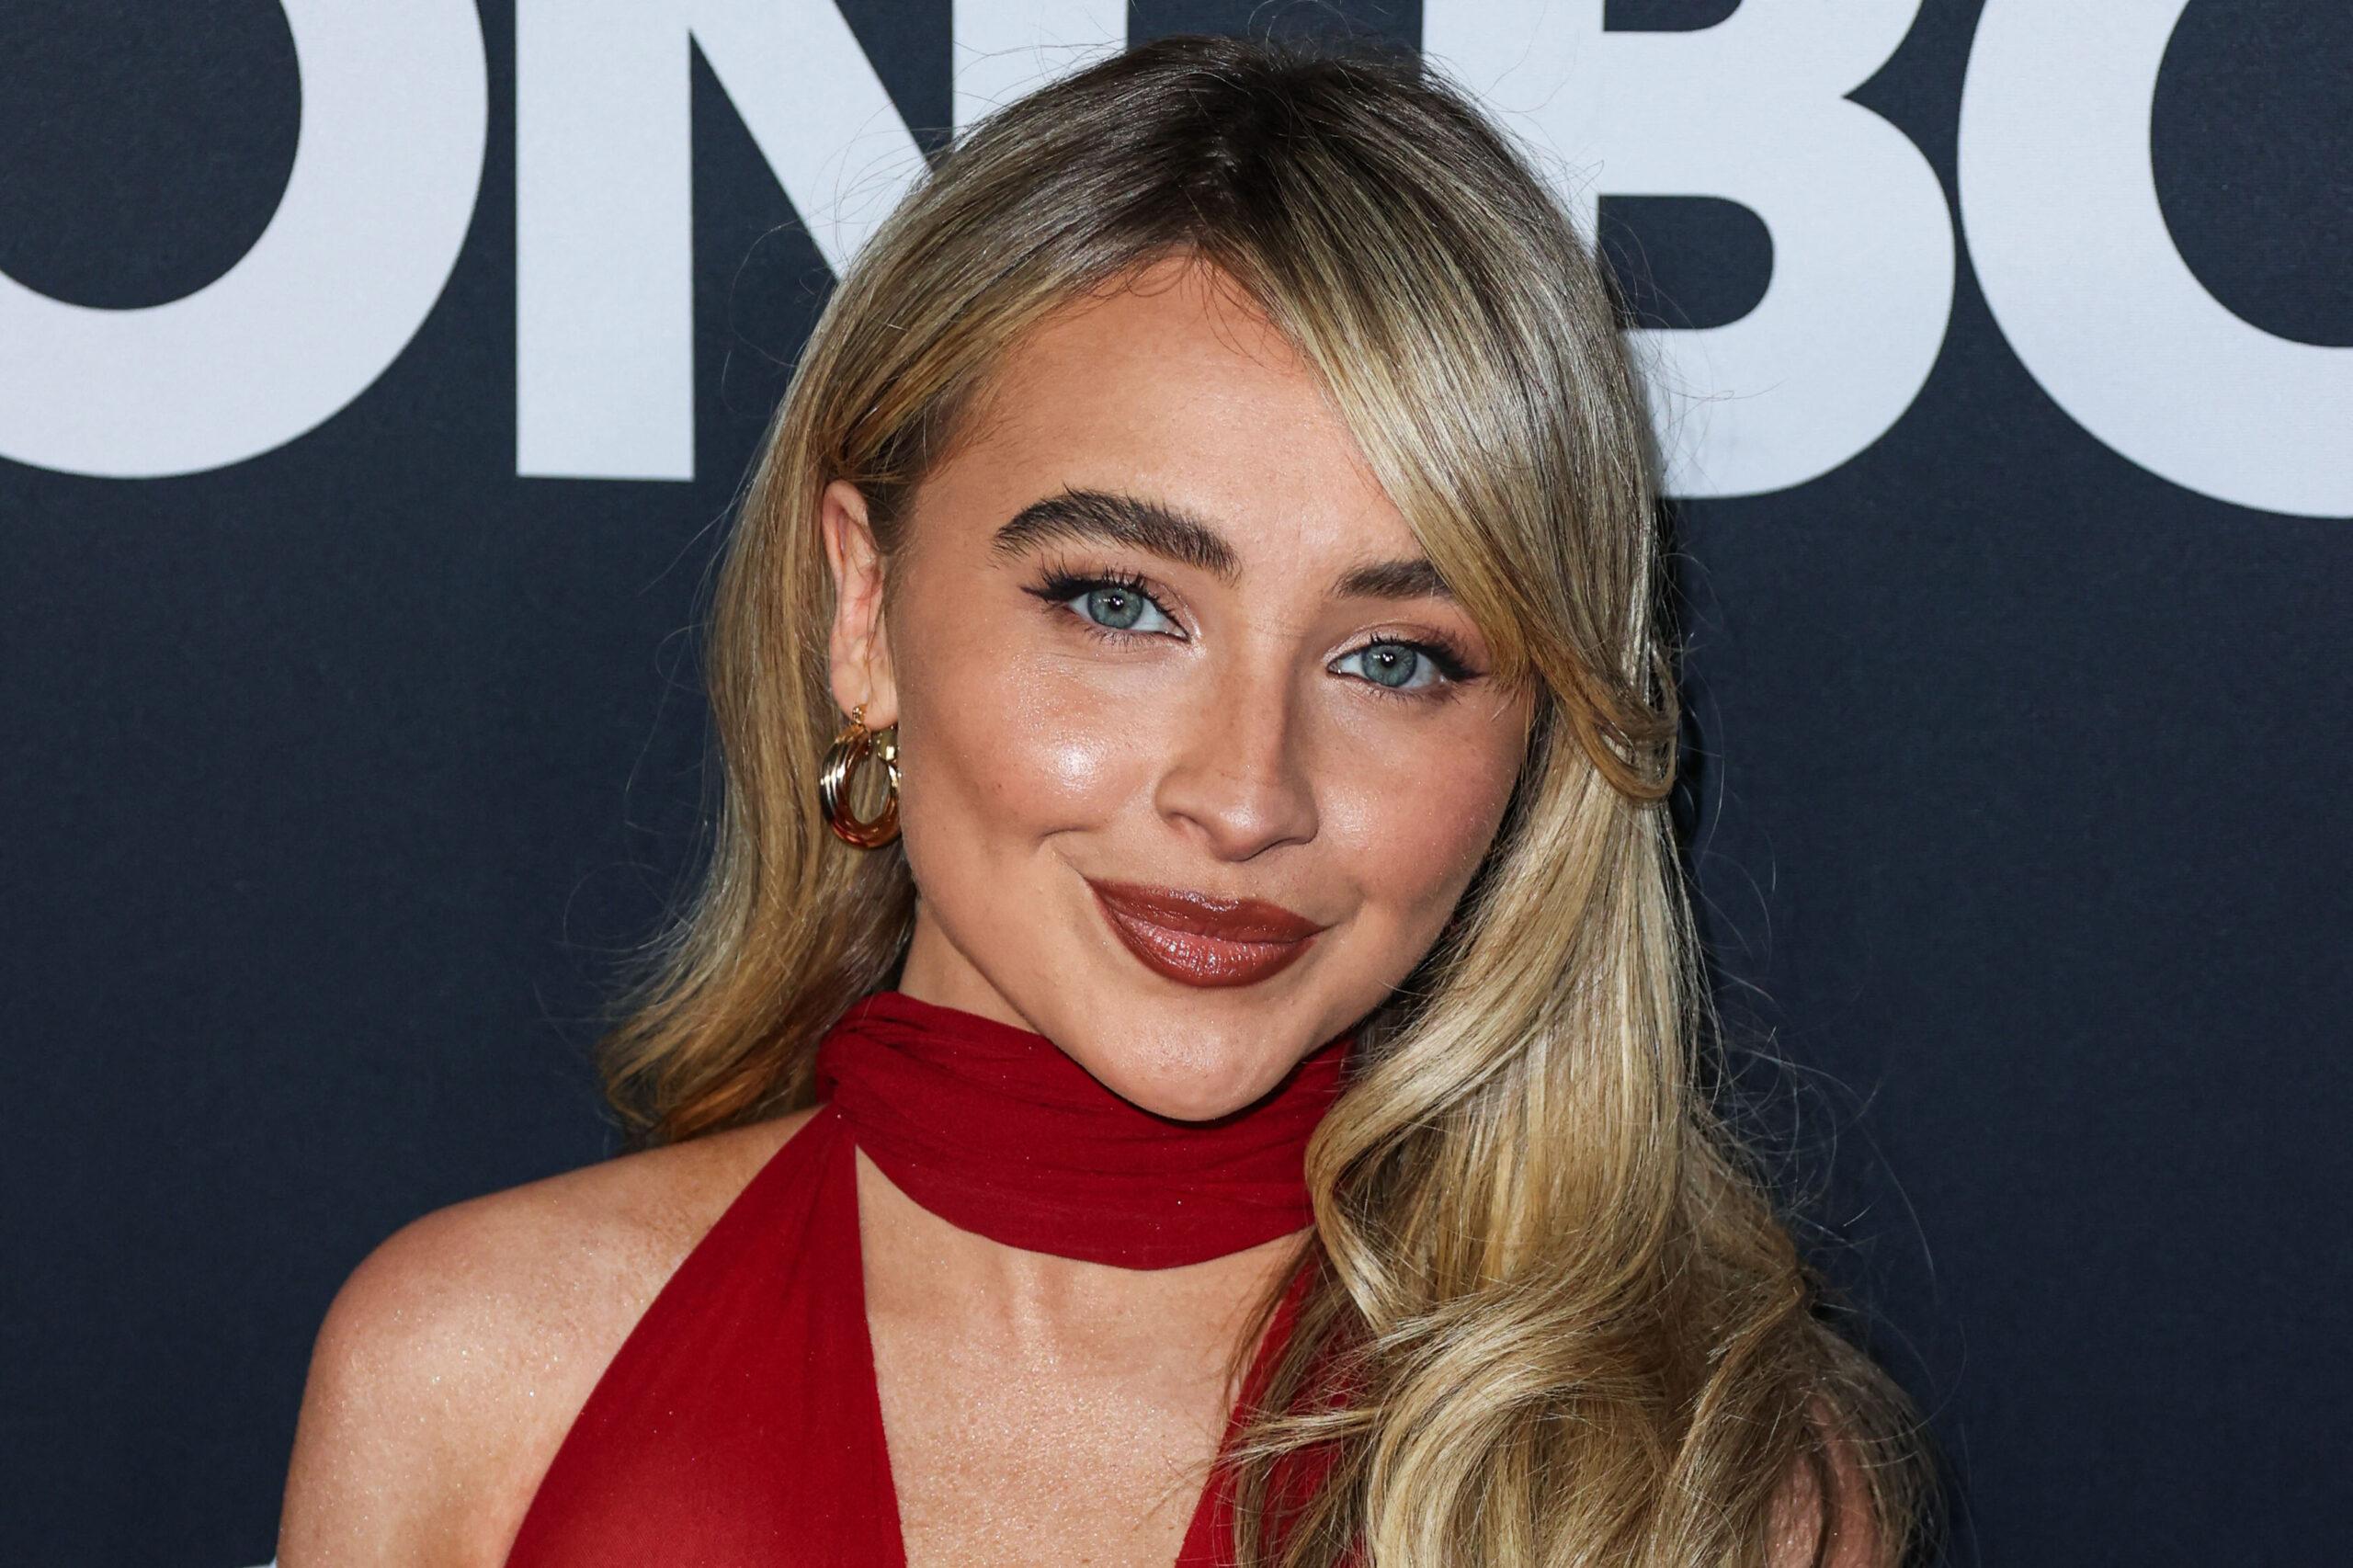 Sabrina Carpenter Score First #1 Hit On The Global Spotify With 'Espresso' 